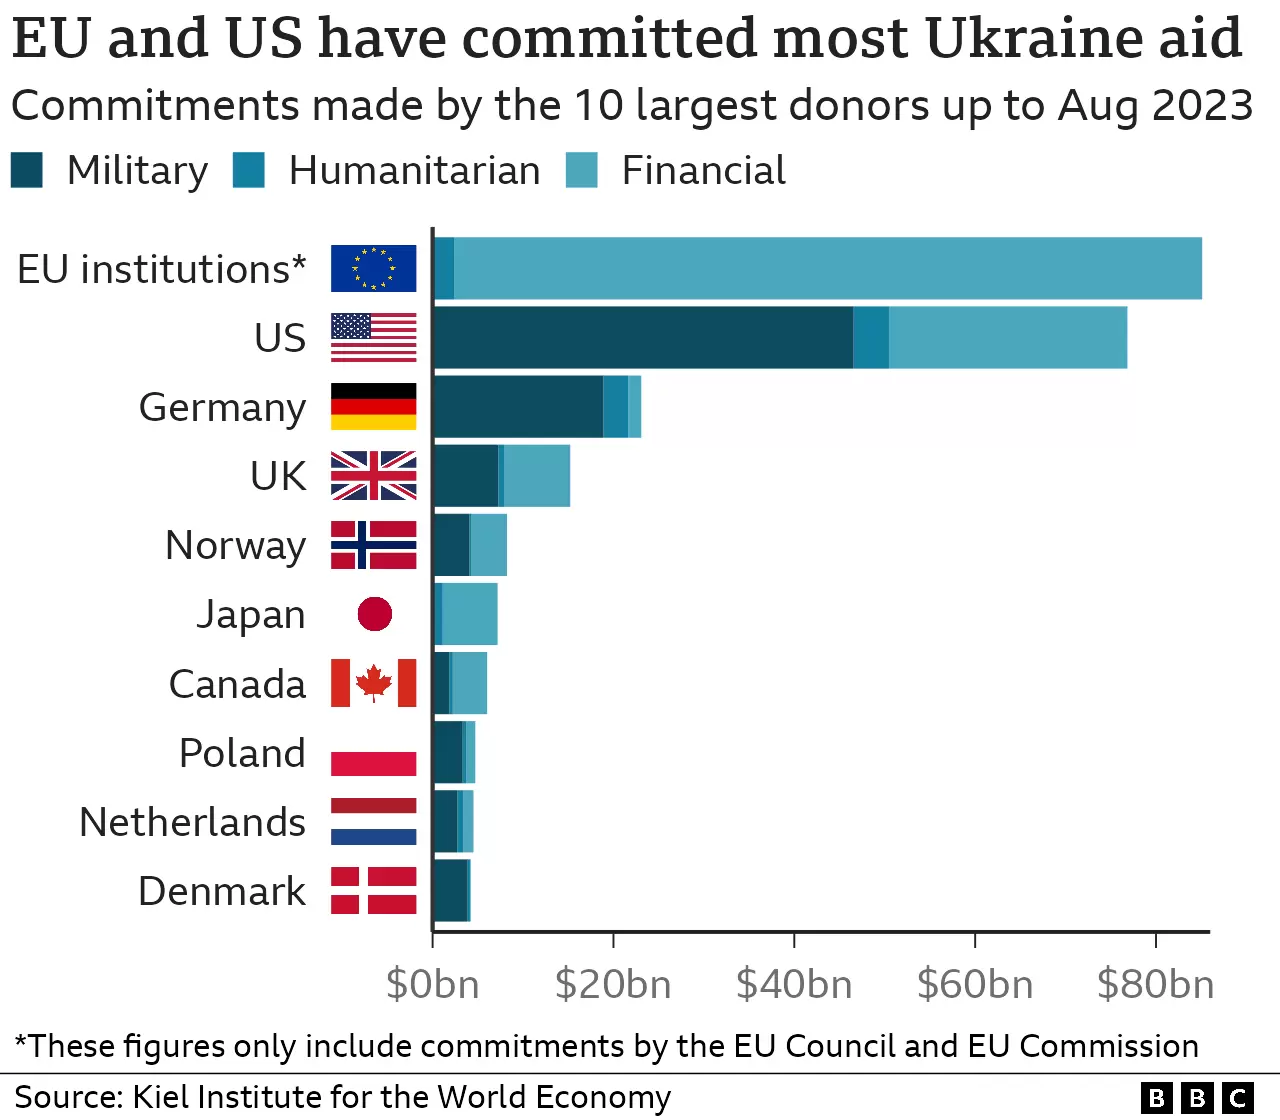 How does US support for Ukraine compare?